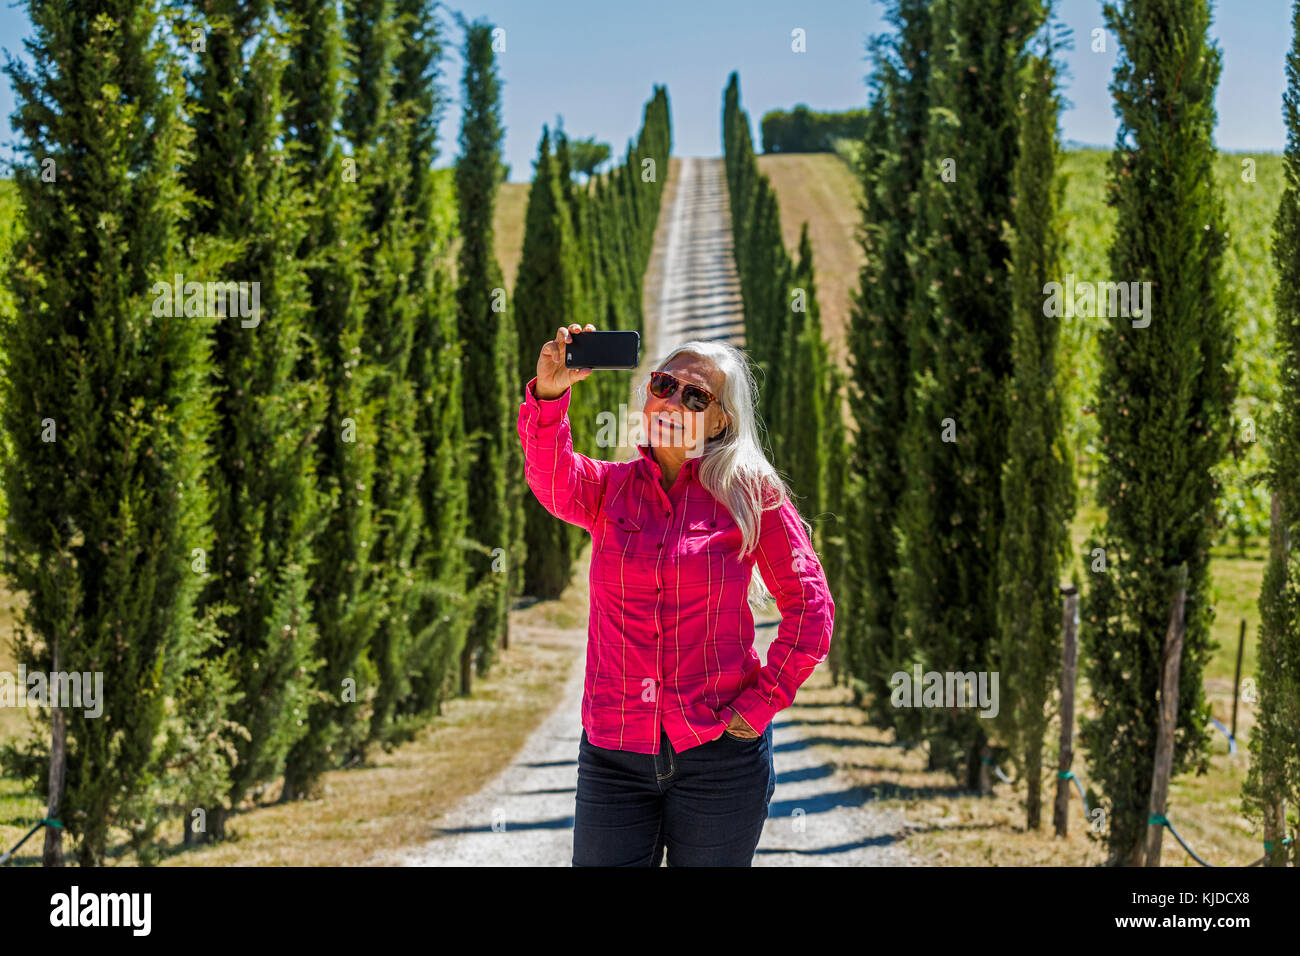 Caucasian woman posing for cell phone selfie on dirt road Stock Photo